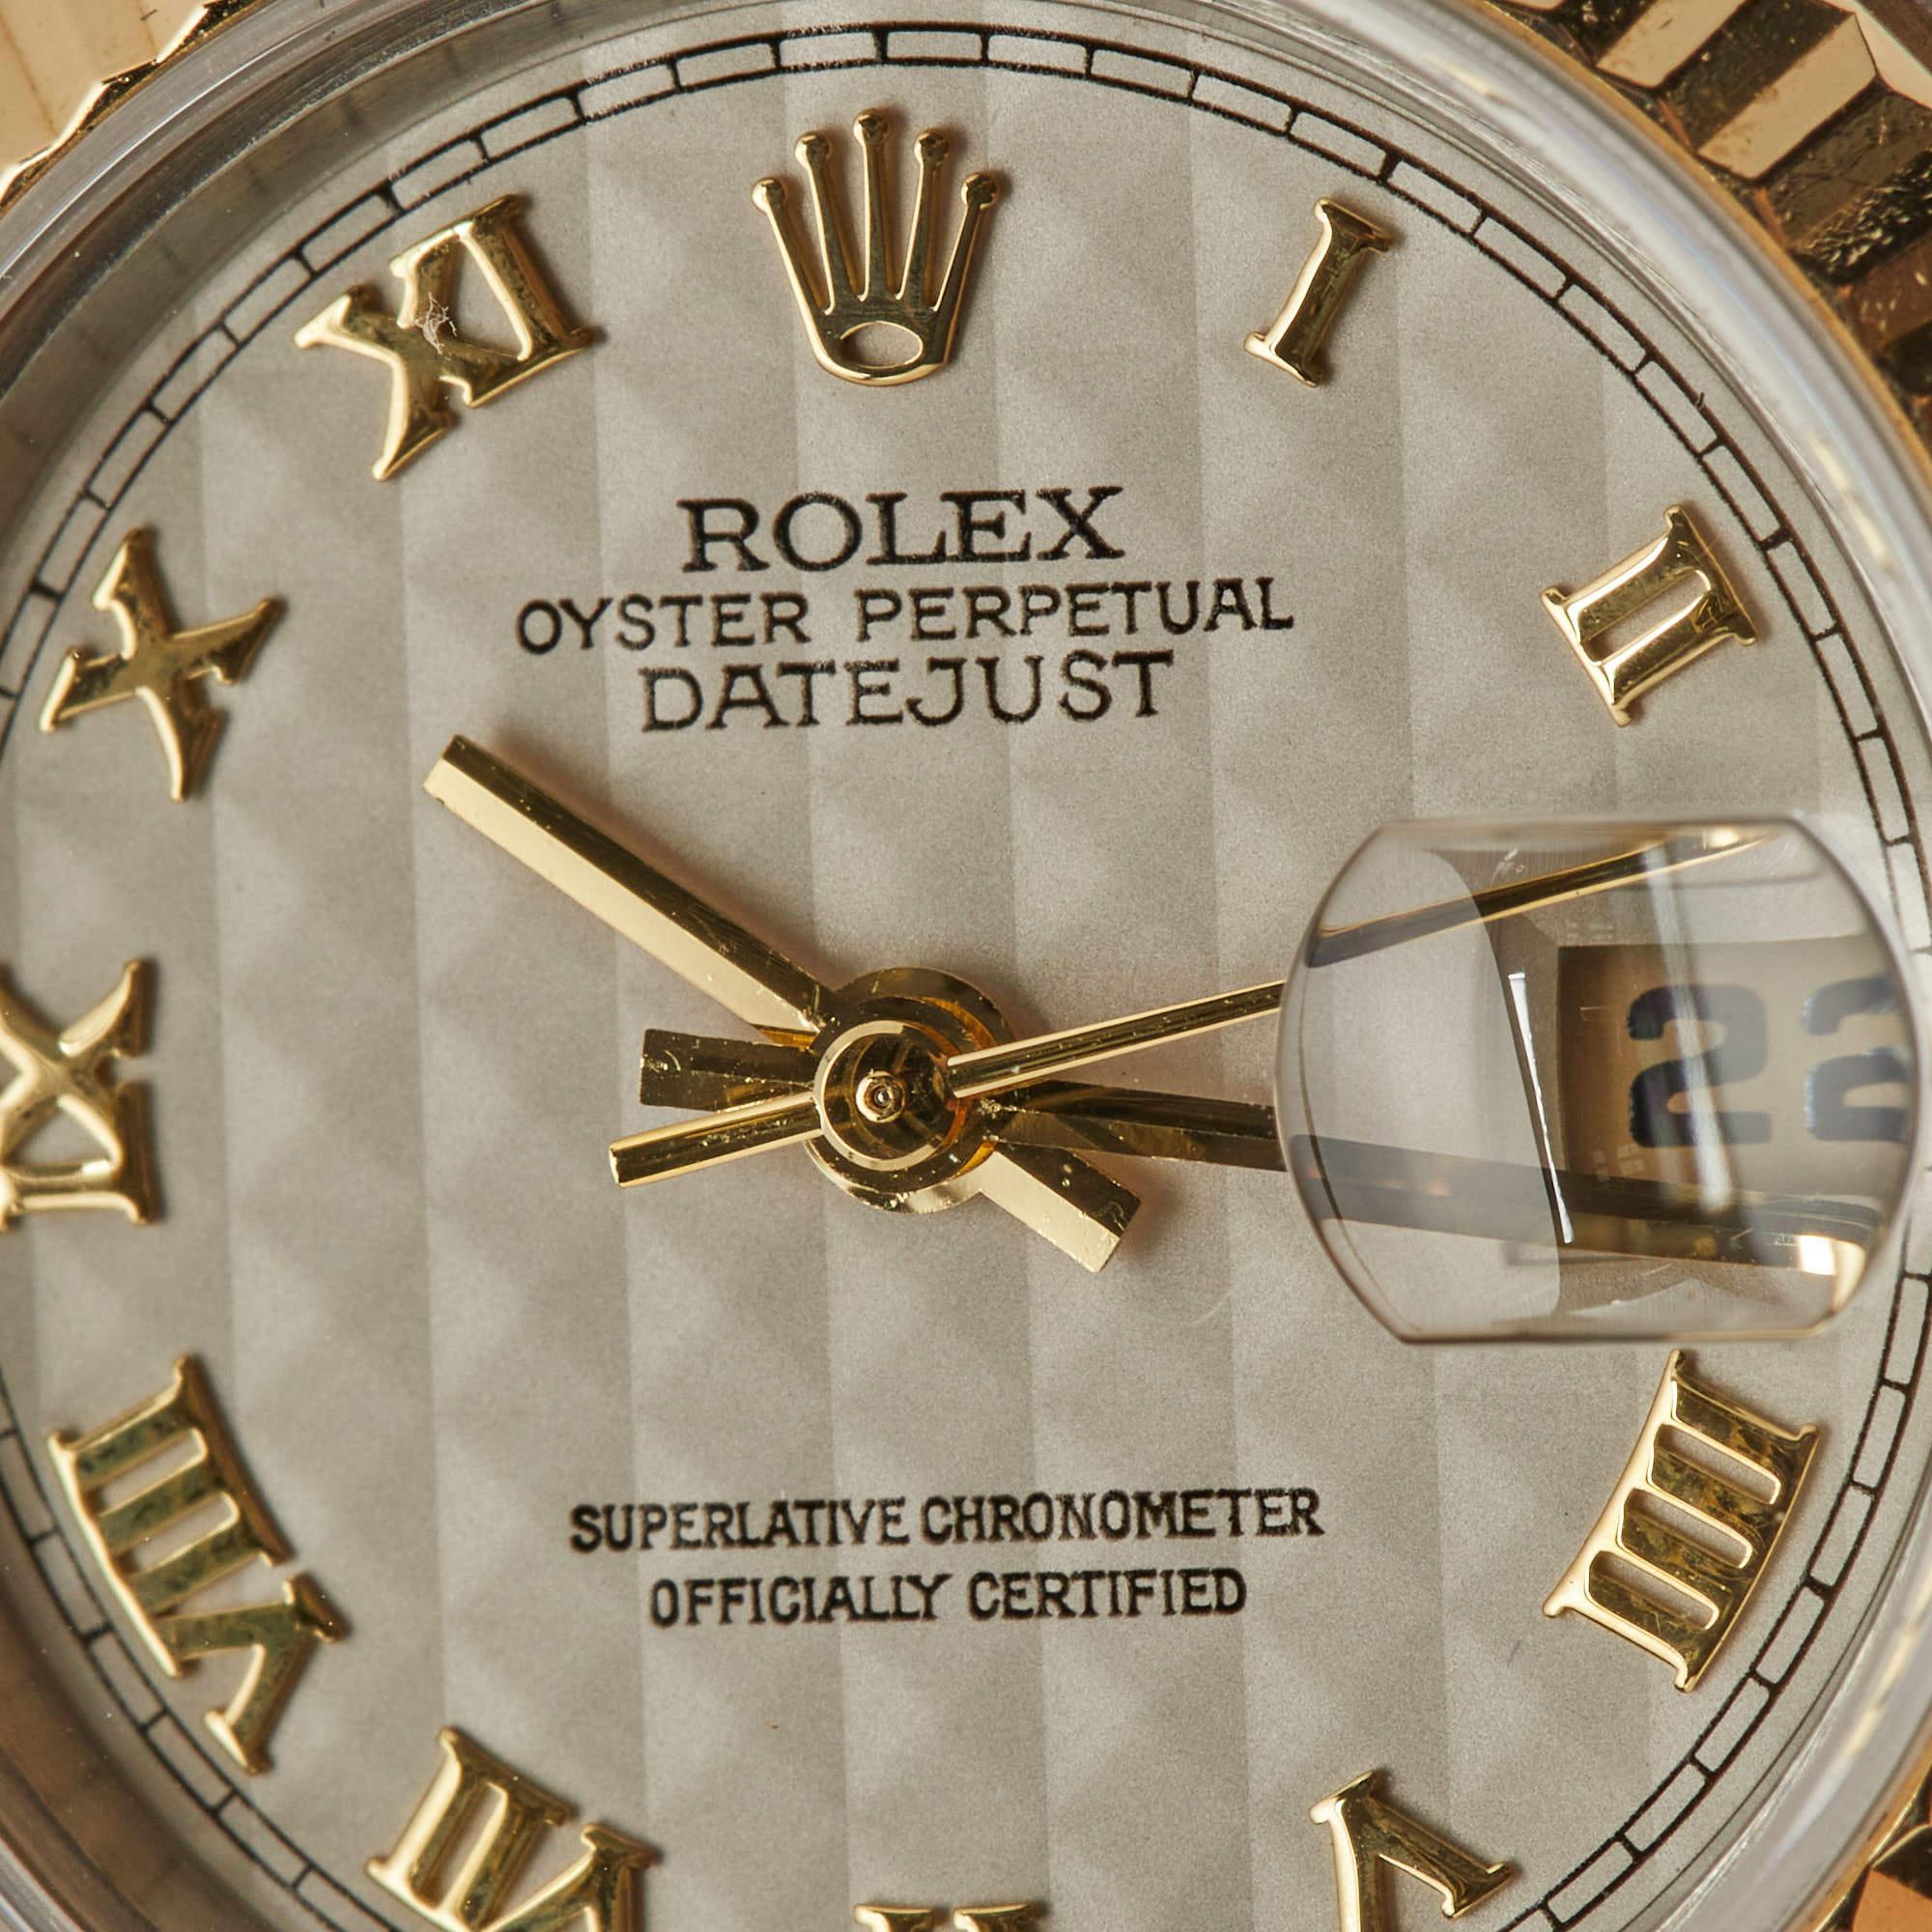 This beautiful Rolex Datejust for women will be a fine investment. Crafted using stainless steel and 18k yellow gold, the automatic watch features an ivory dial set with Roman numeral hour markers, a date window, and three hands. Iconic,